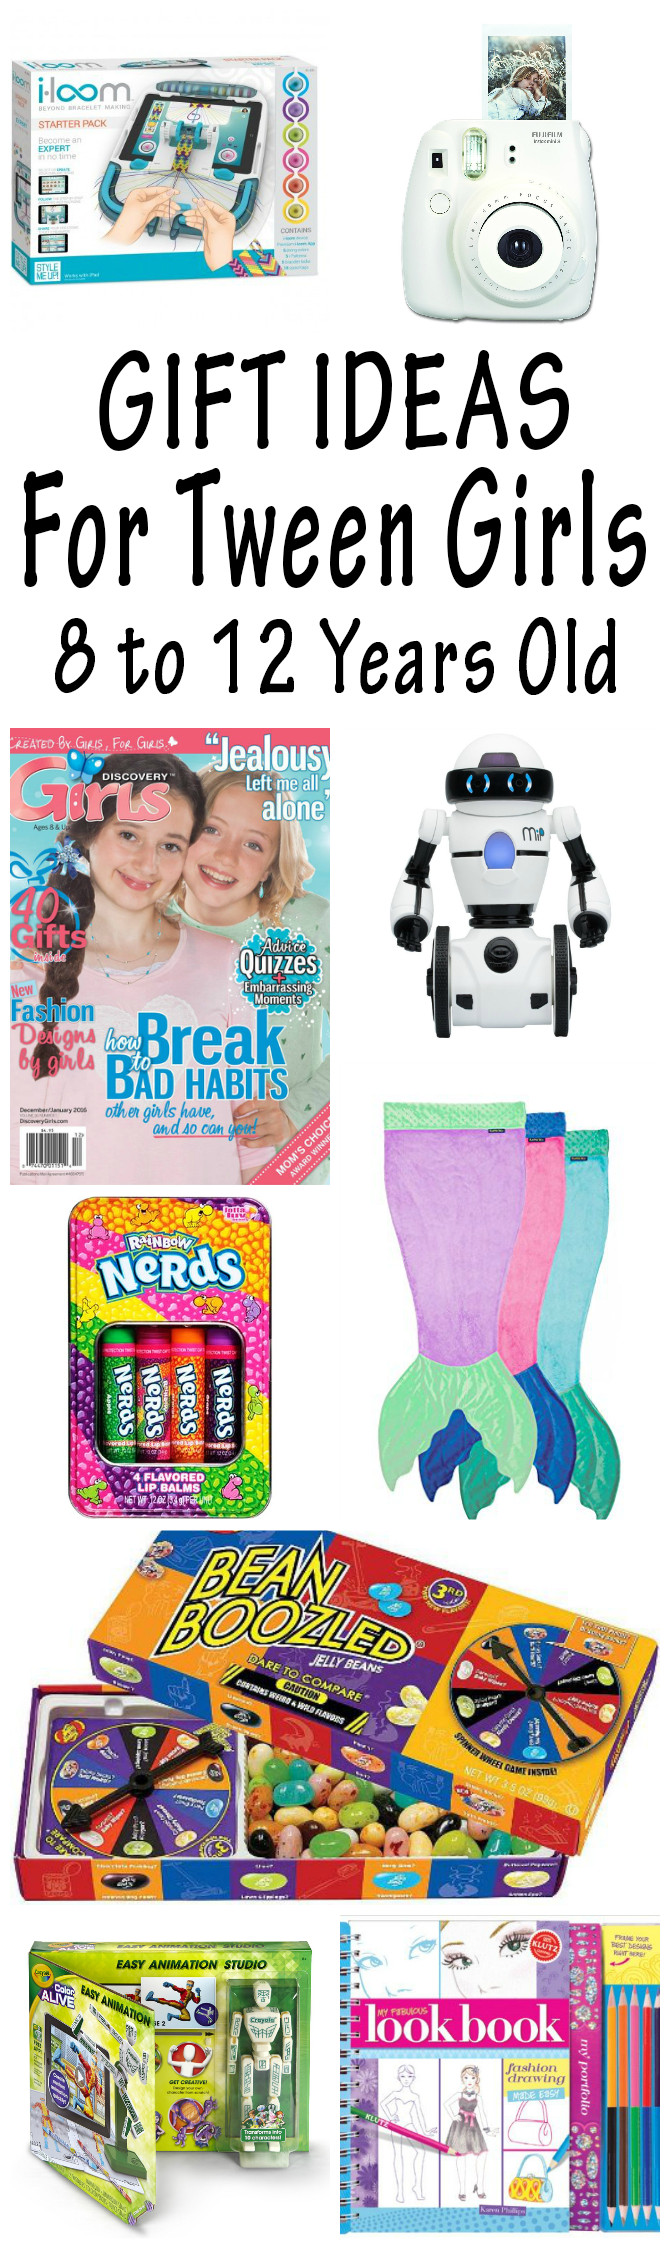 Gift Ideas For 12 Year Old Girls
 Gift Ideas For Tween Girls They Will Love 2017 Christmas